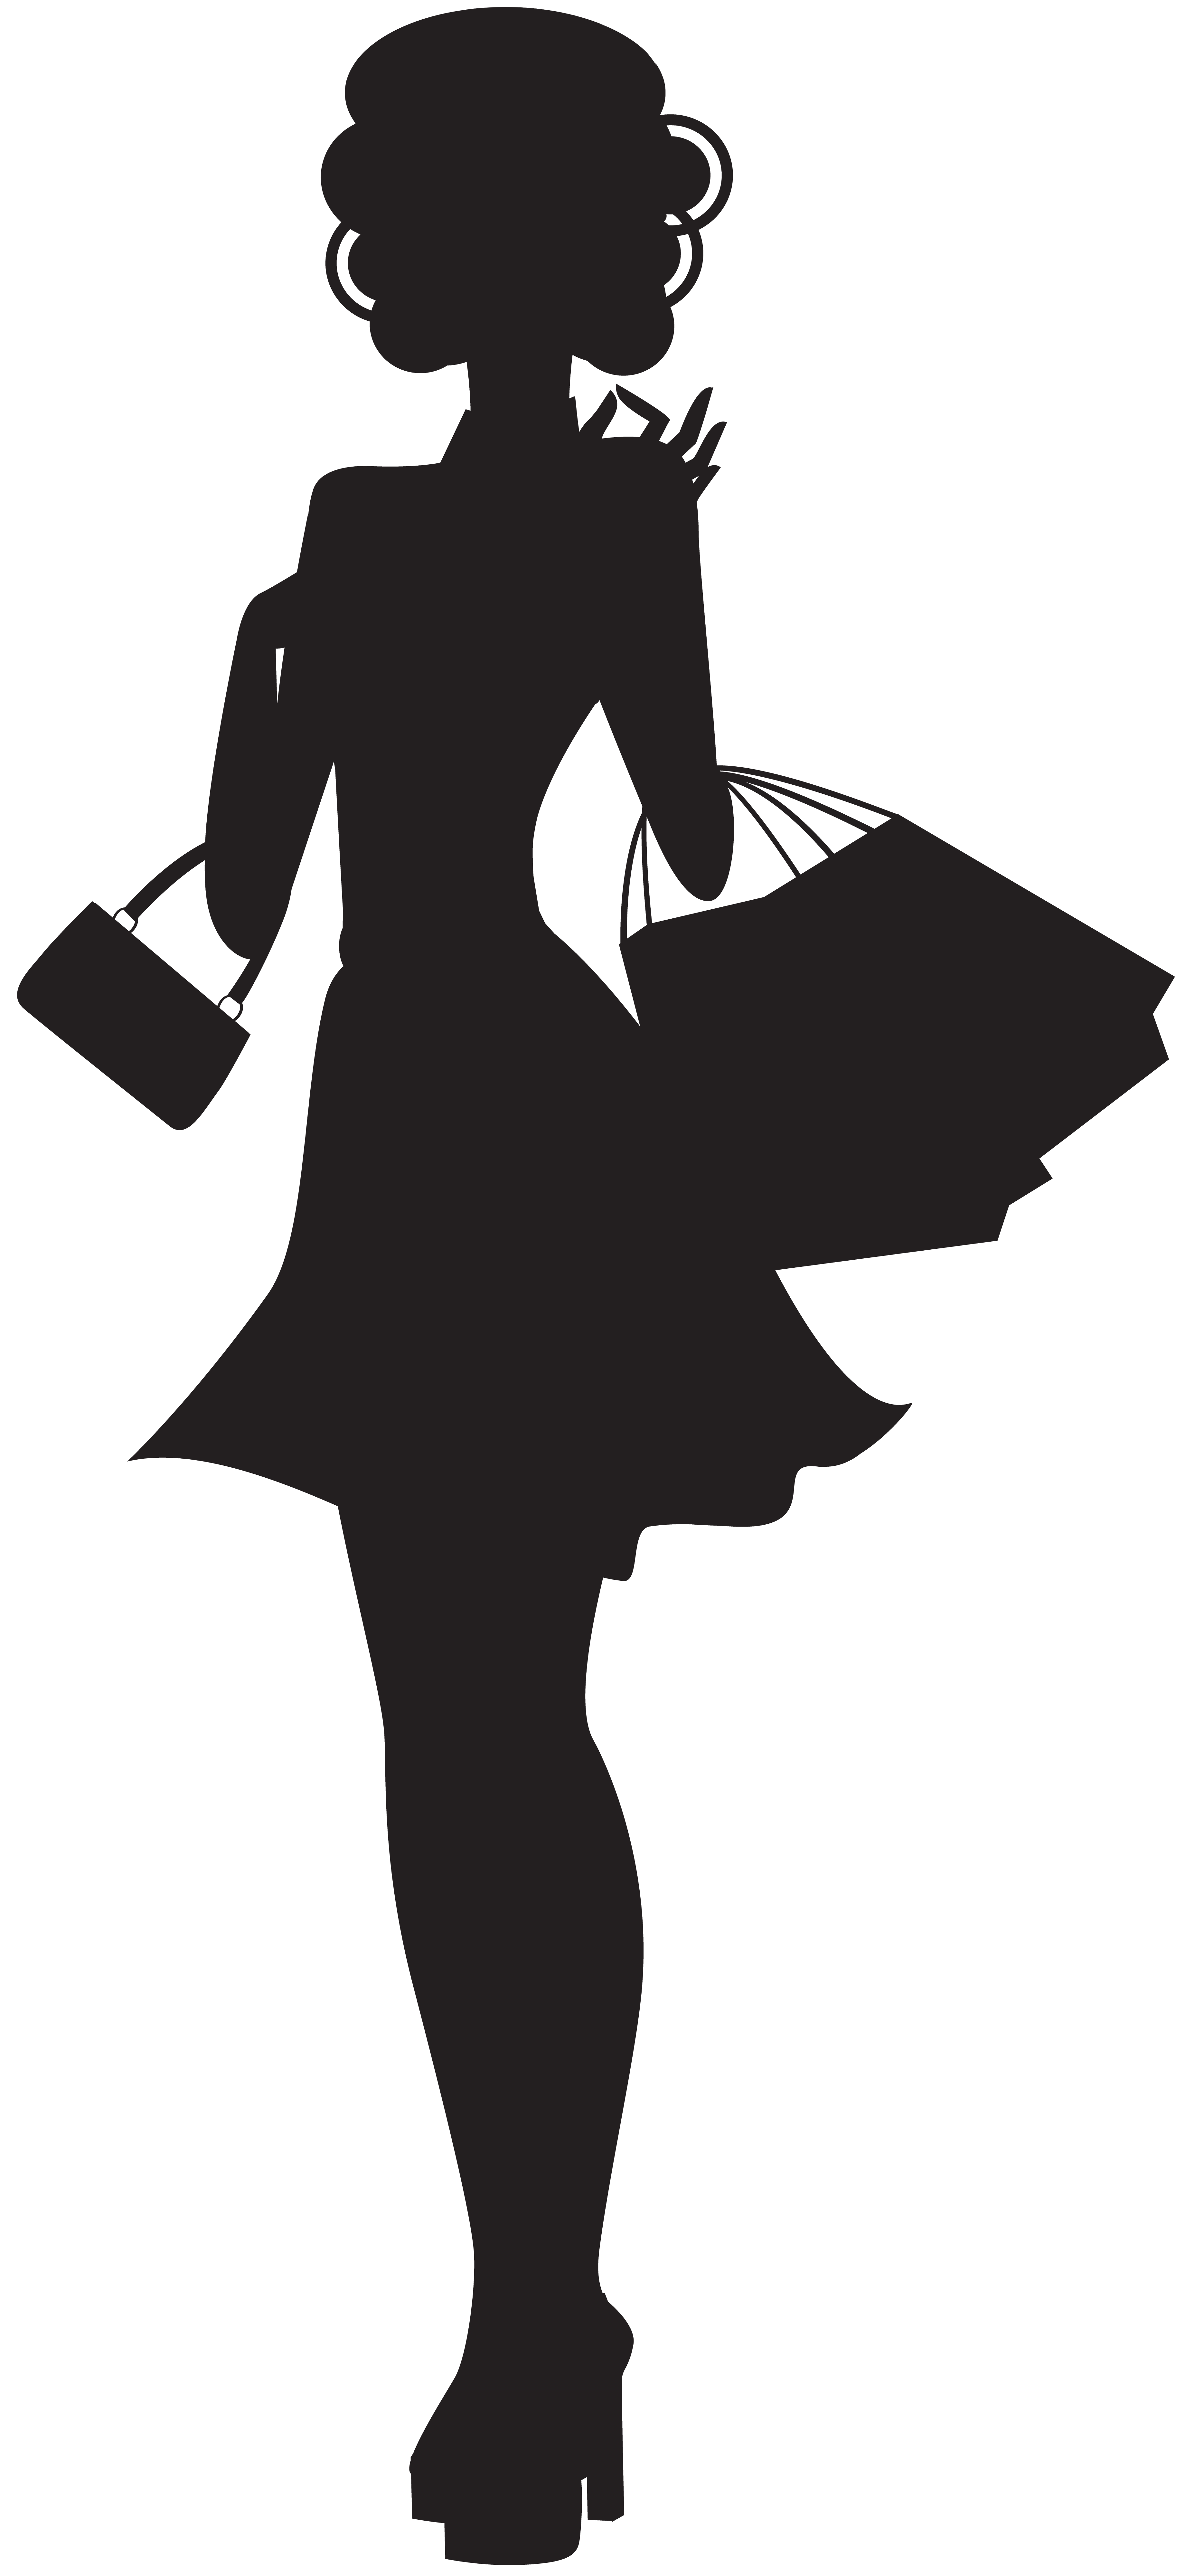 Shopping Woman Silhouette PNG Image High Quality Clipart